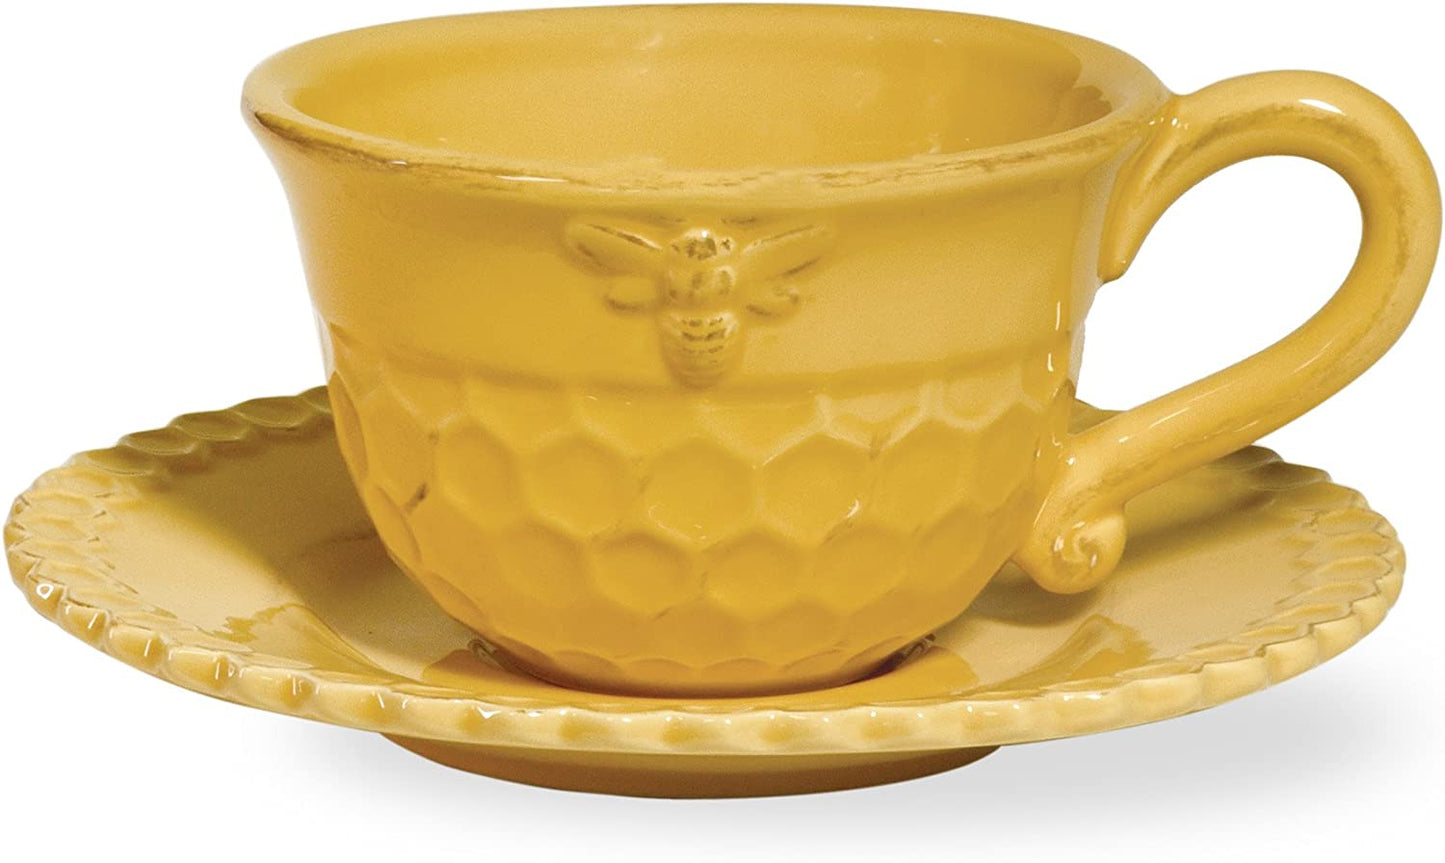 Boston International Embossed Stoneware Teacup and Saucer Set, 8-Ounces, Honeycomb